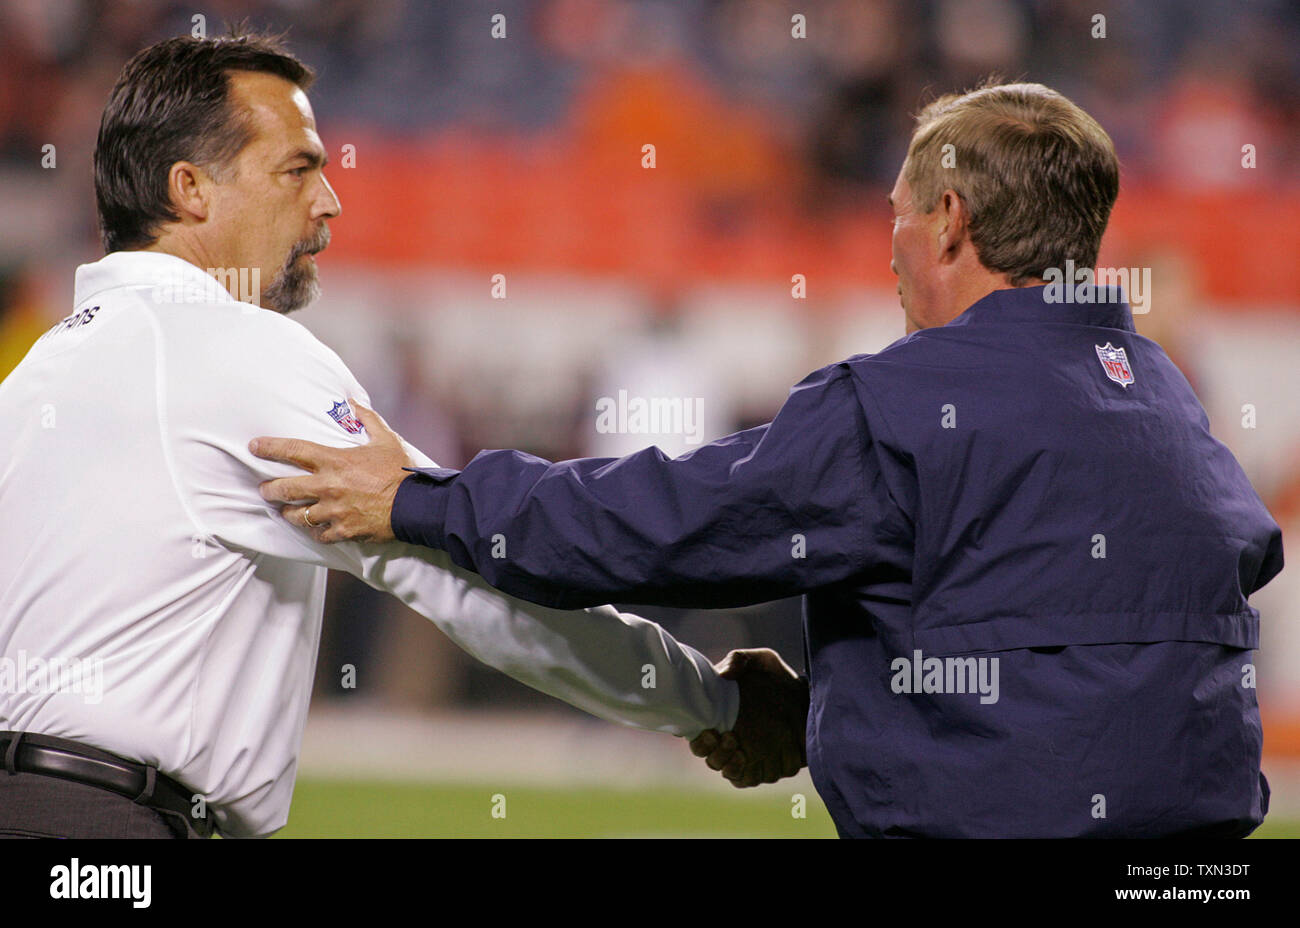 Tennessee Titans head coach Jeff Fisher (L) shakes hands with Denver Broncos head coach Mike Shanahan before their game at Invesco Field at Mile High in Denver on November 19, 2007.  (UPI Photo/Gary C. Caskey) Stock Photo